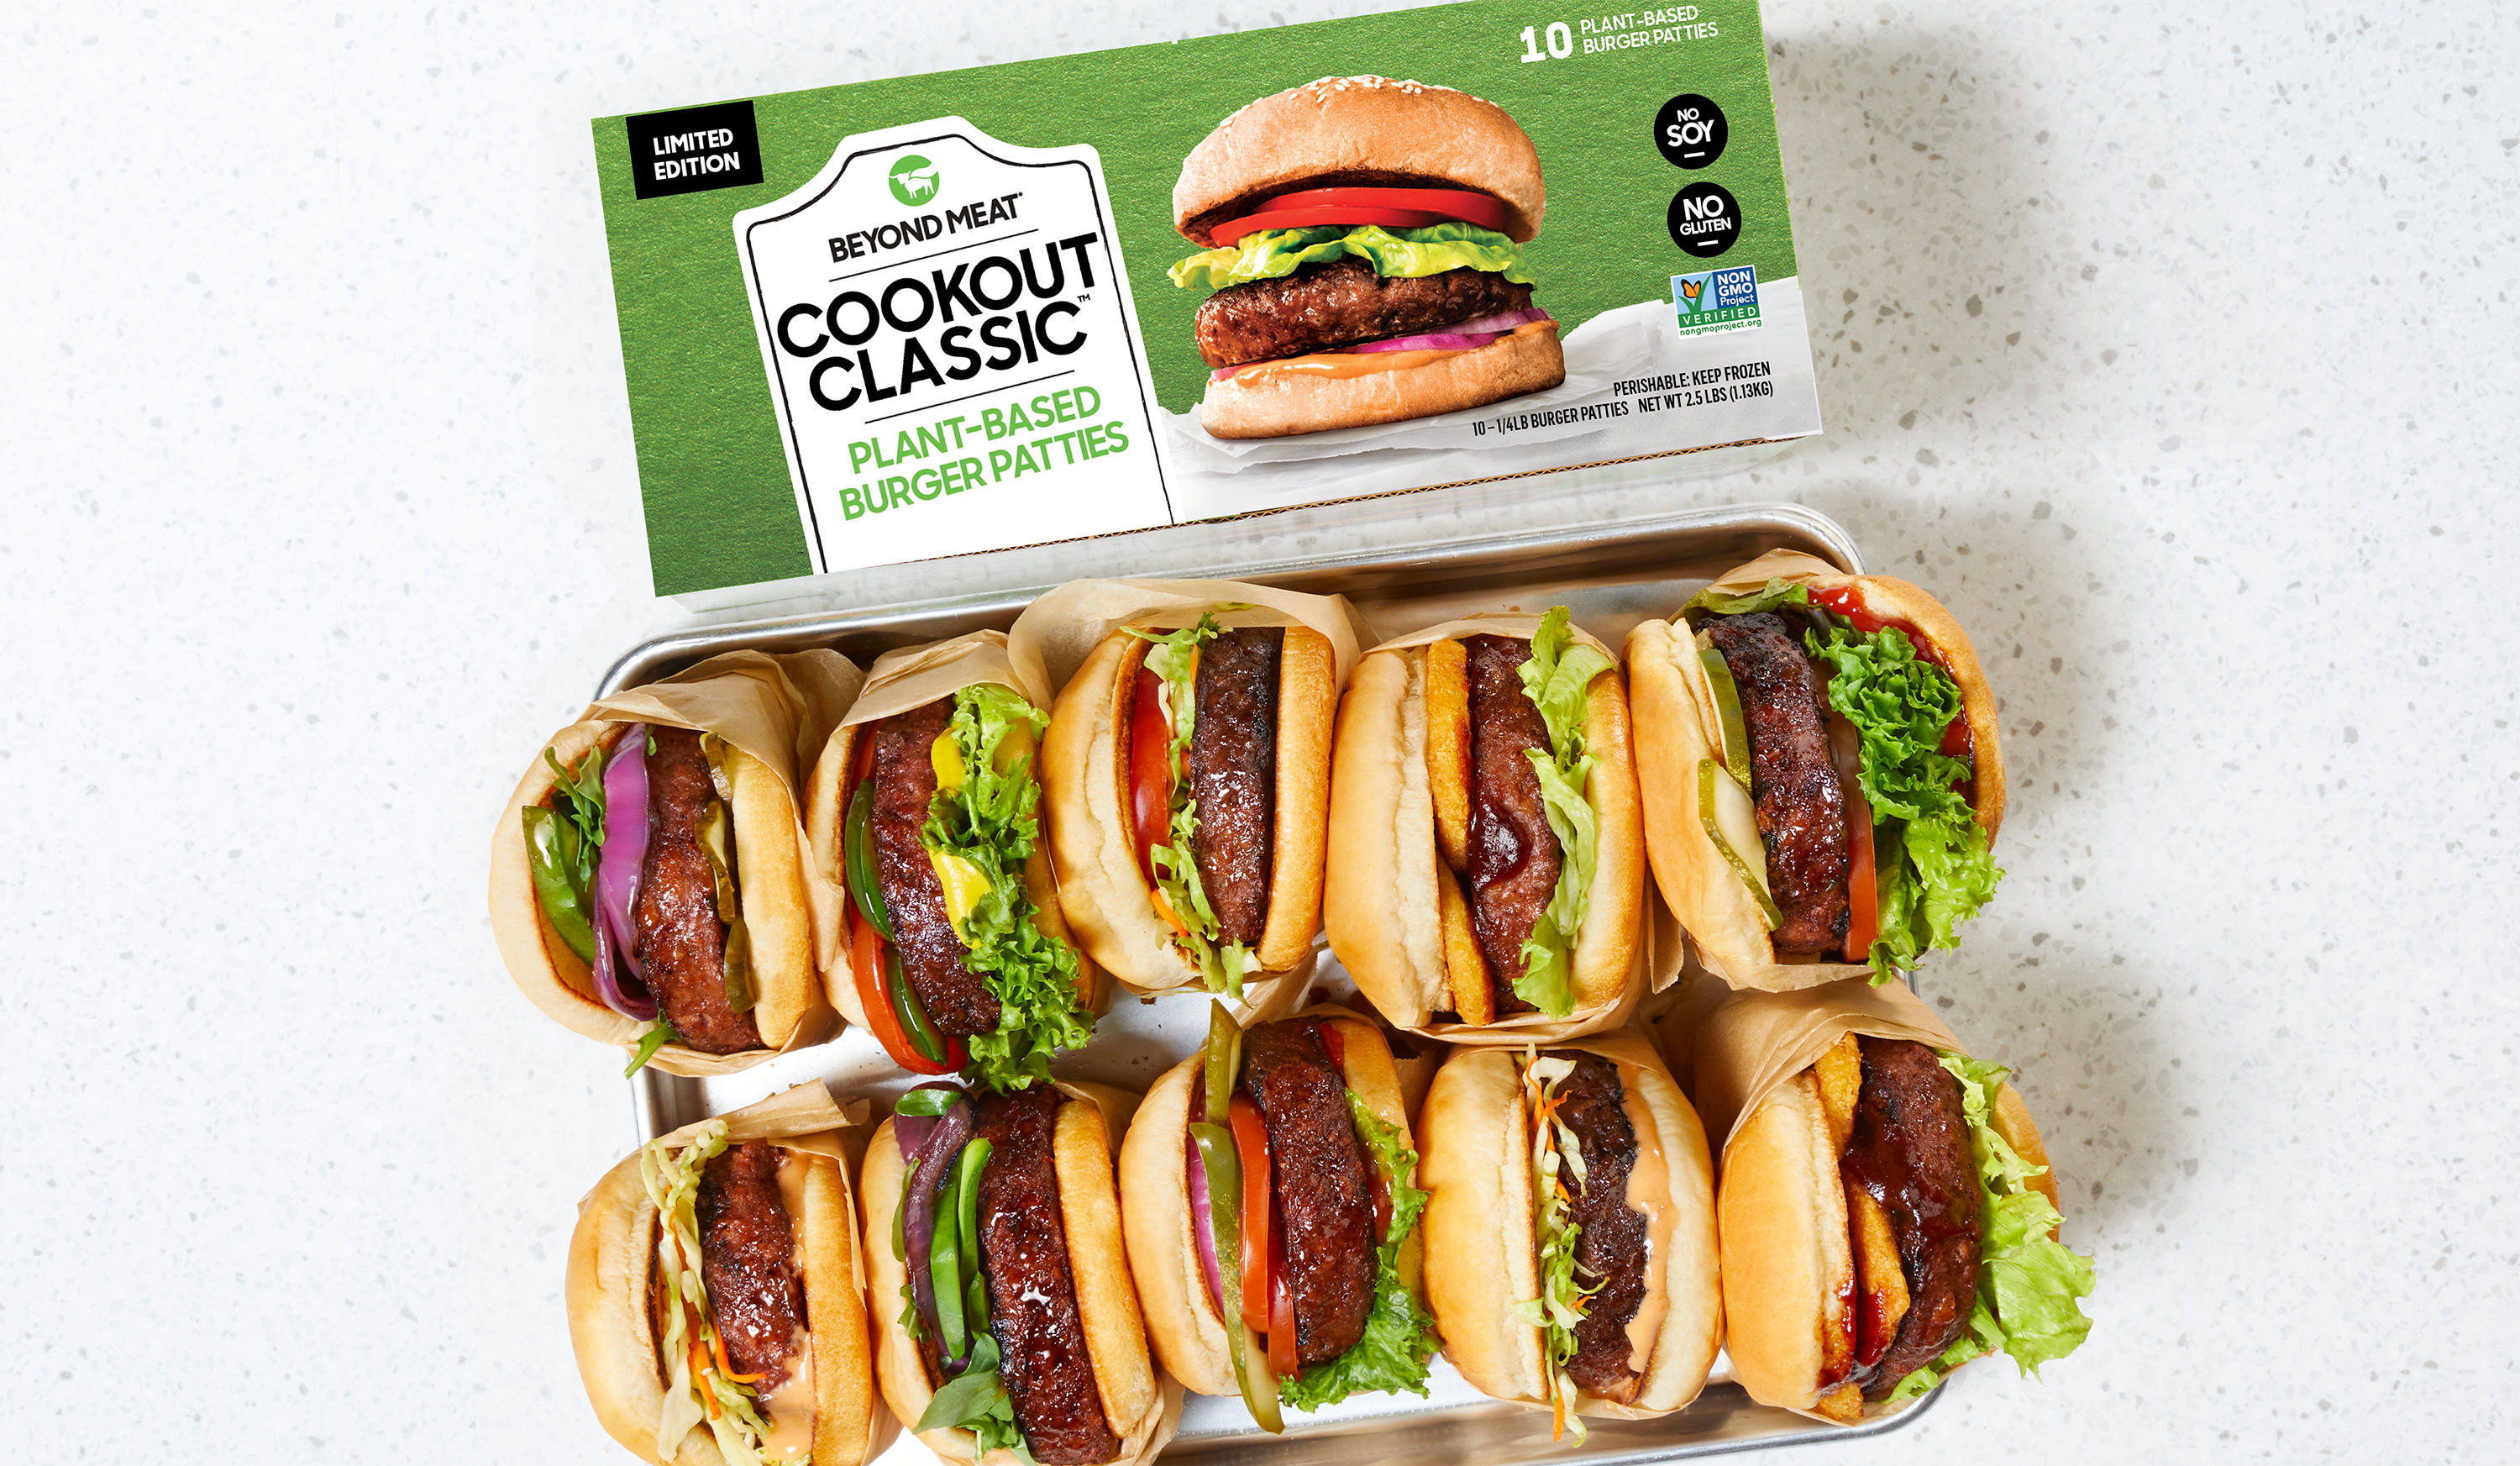 Beyond Meat's Stock Gains After Launching Affordable 'Cookout Classic' Line